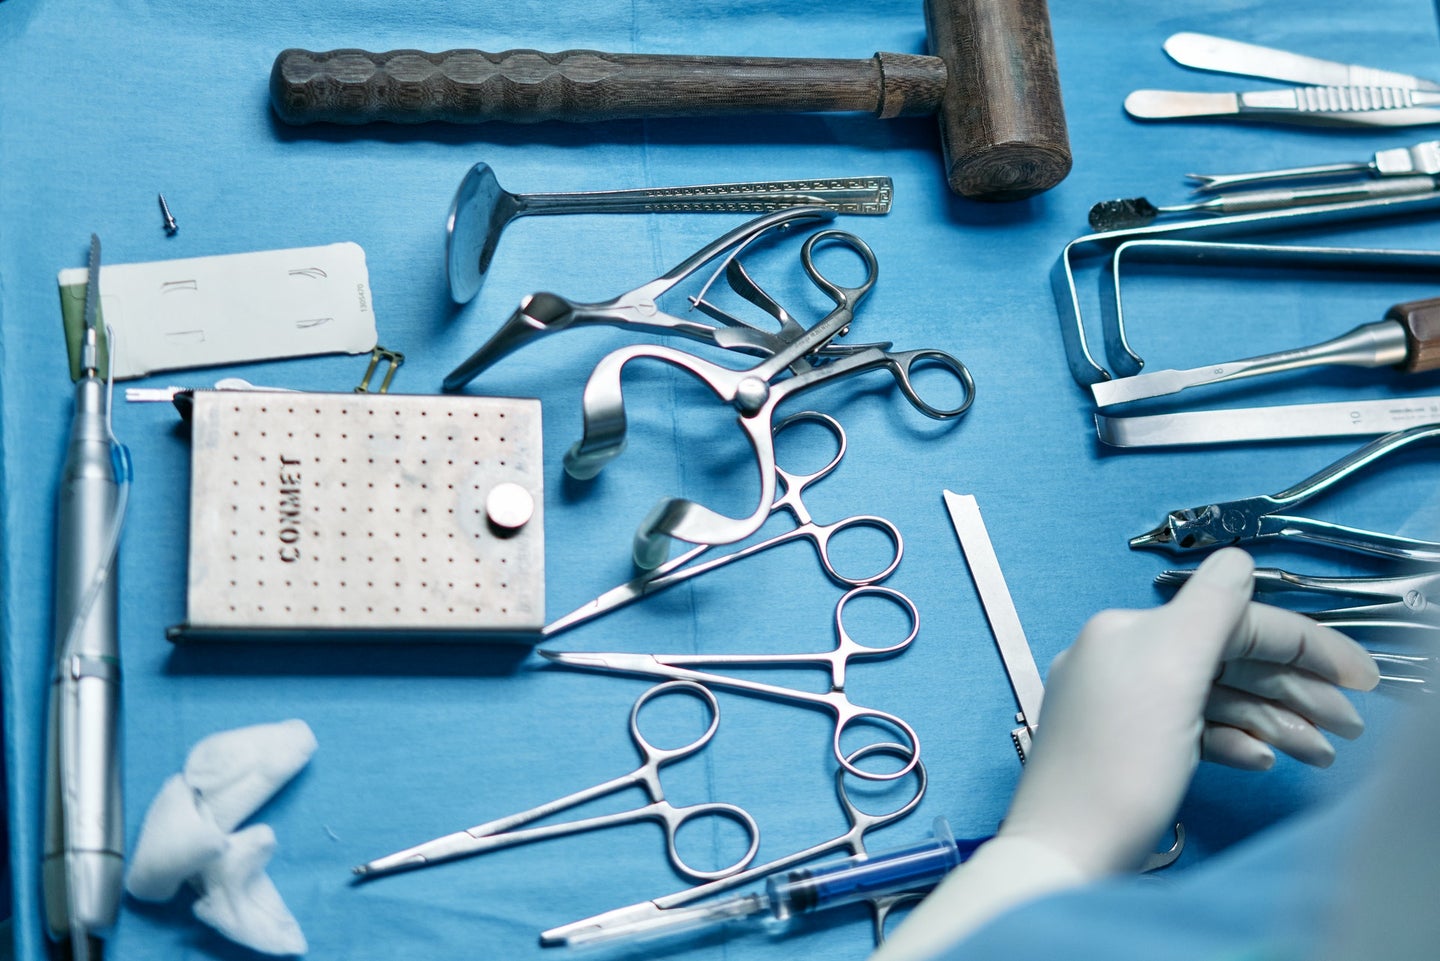 Surgical tools on blue backdrop.